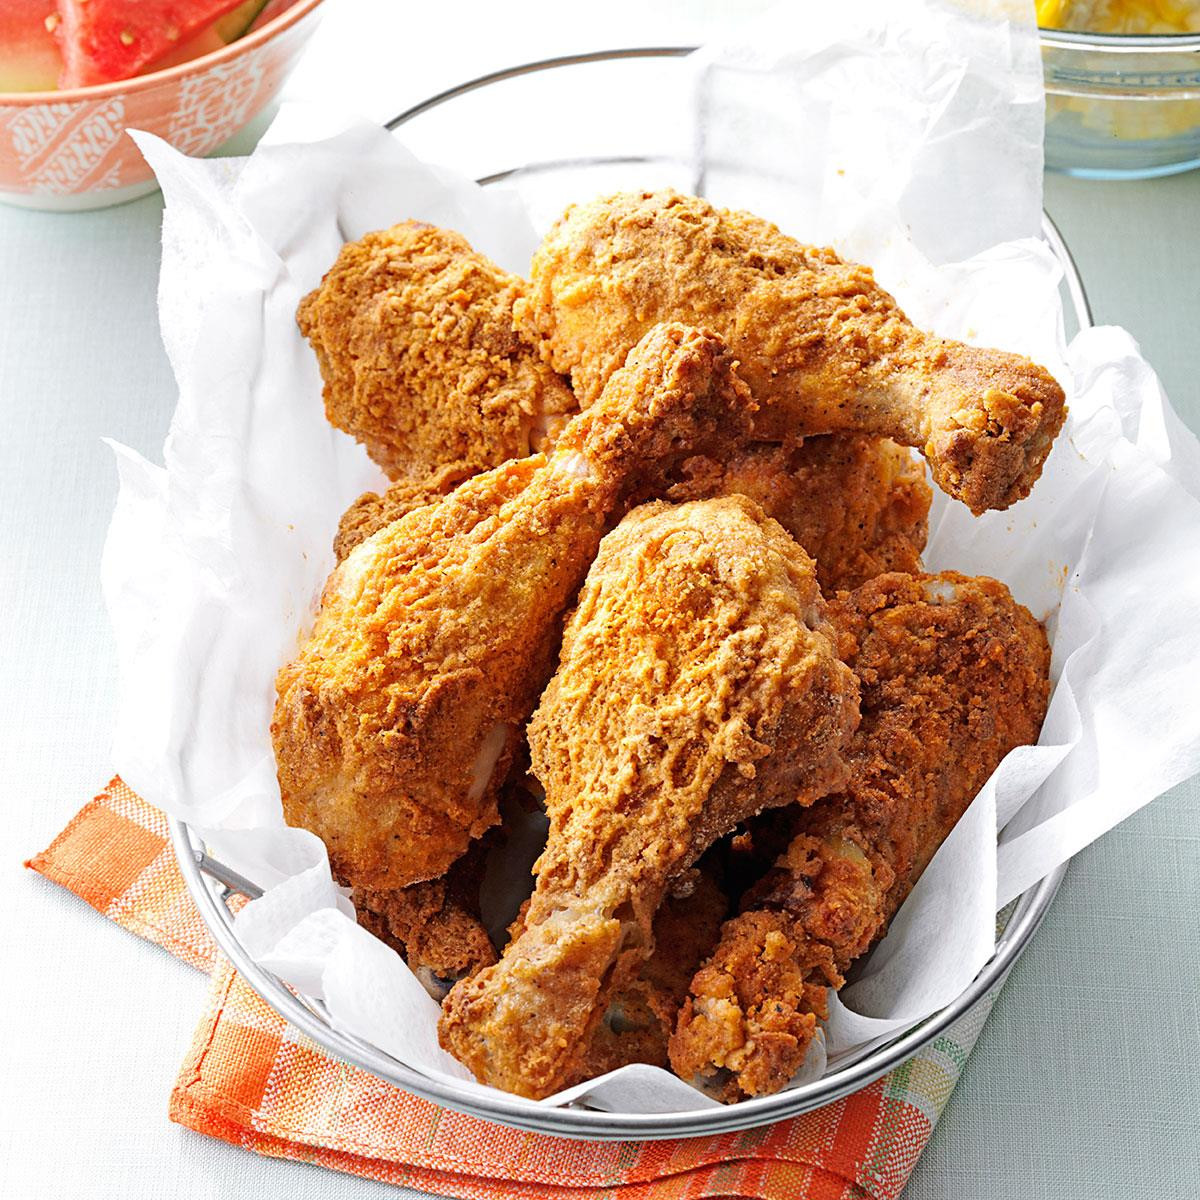 Fried Chicken In The Oven
 Oven Fried Chicken Drumsticks Recipe